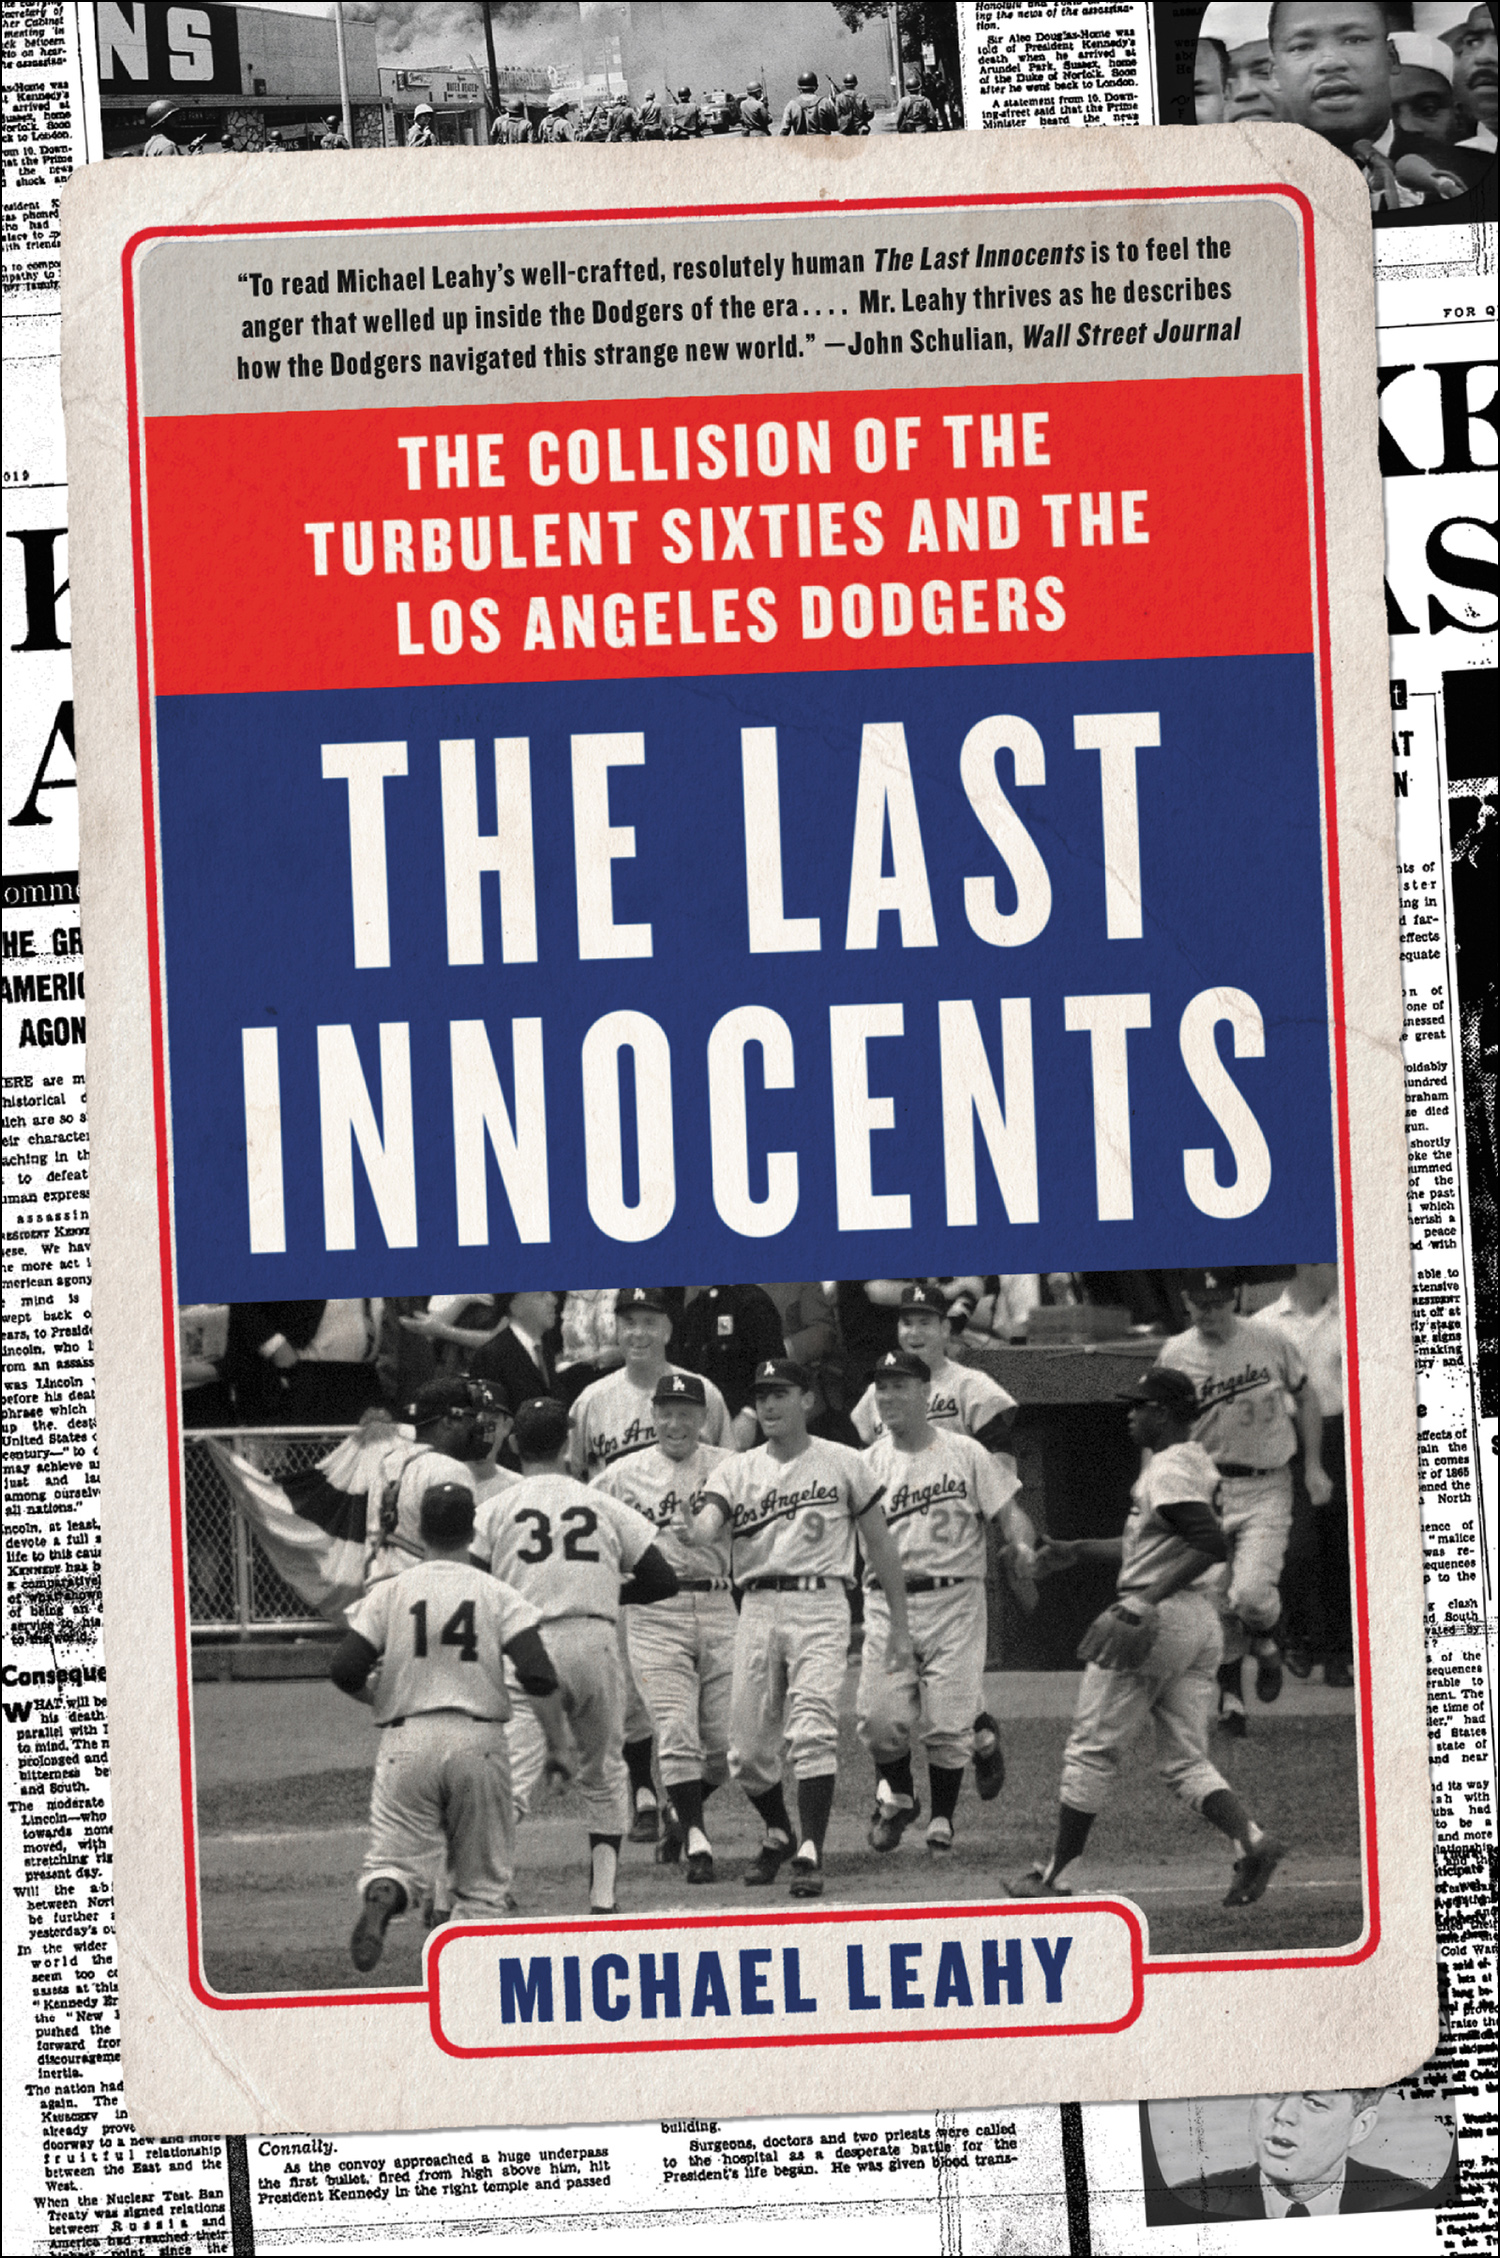 The last innocents the collision of the turbulent sixties and the Los Angeles Dodgers cover image